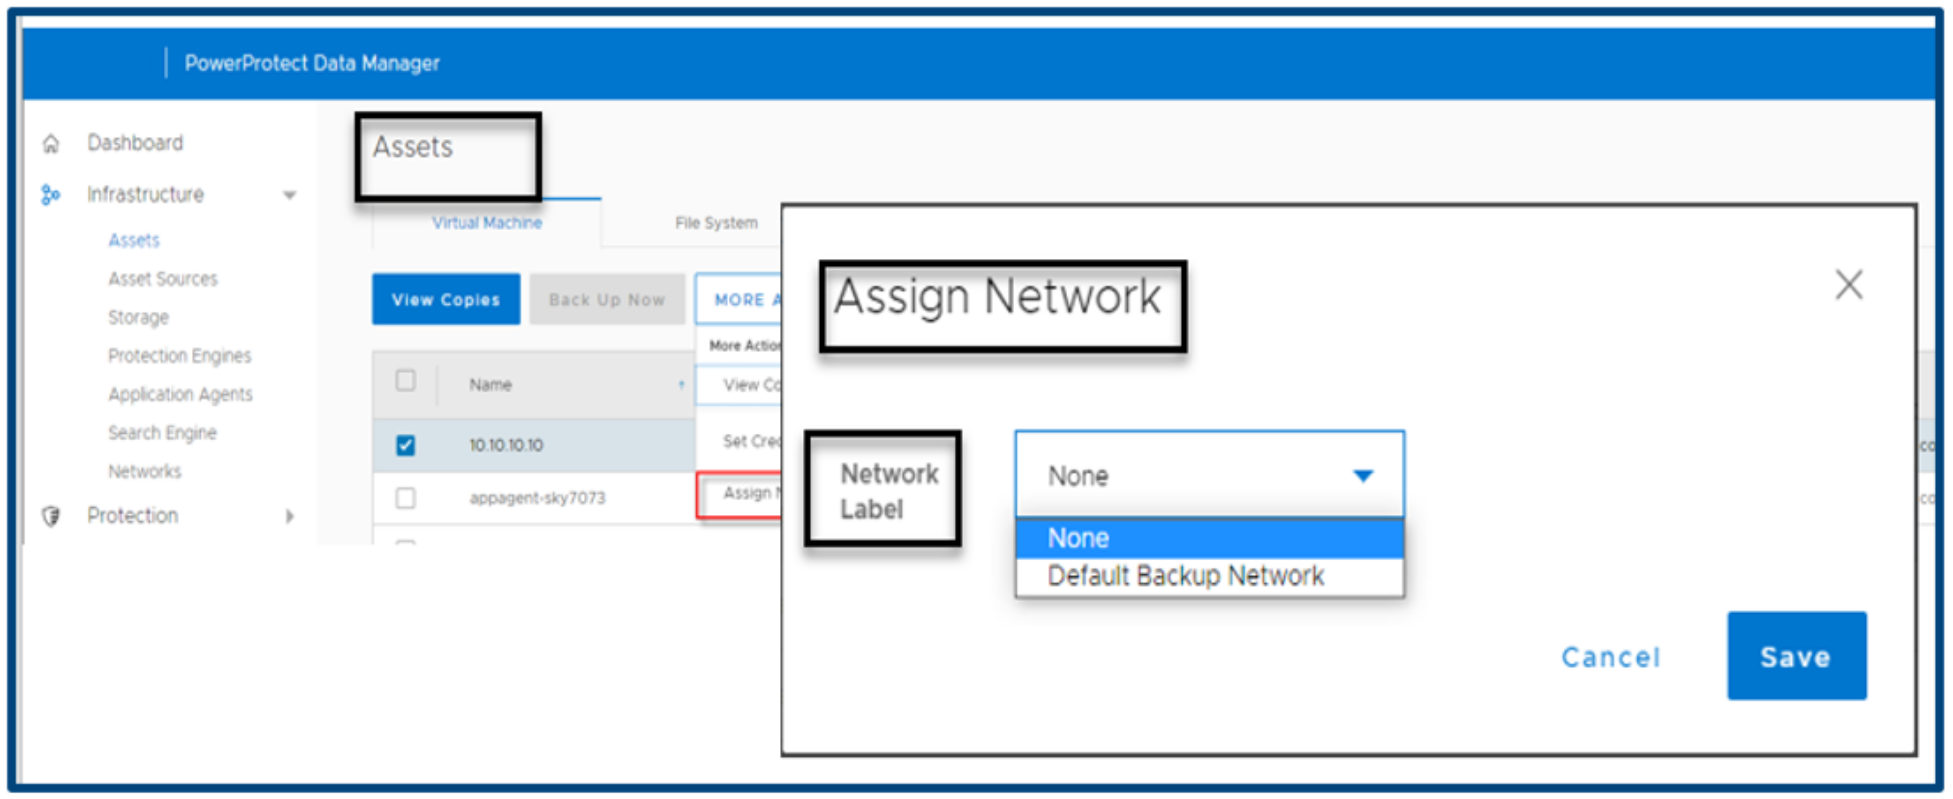 This figure shows the option to label an Assigned Network.